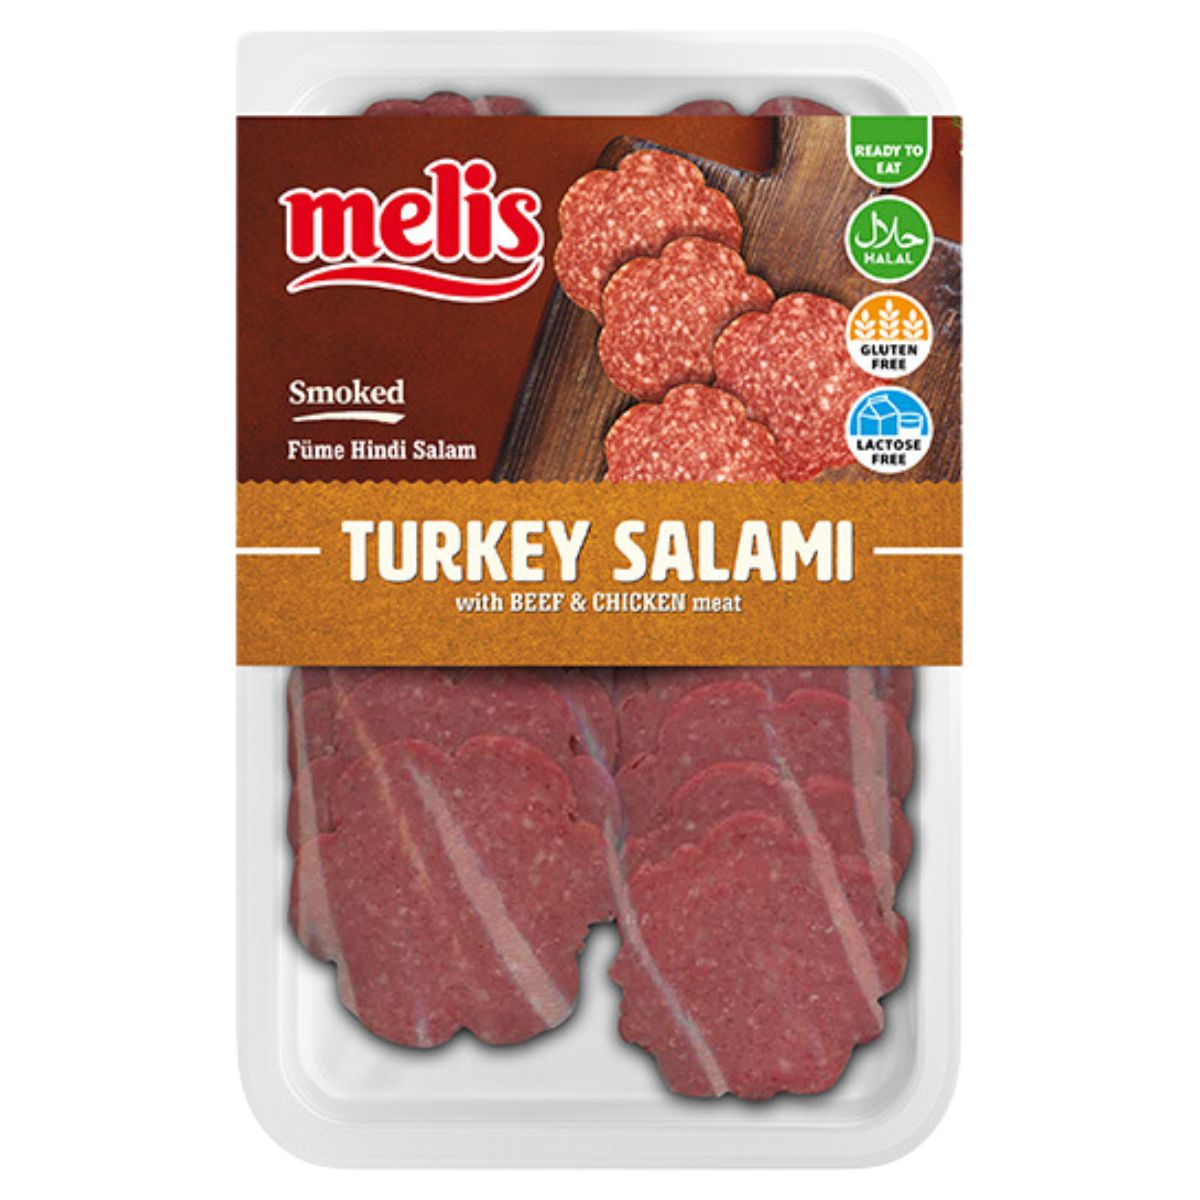 Melis - Smoked Turkey Salami with Beef & Chicken Meat (Halal) - 80g from melis.